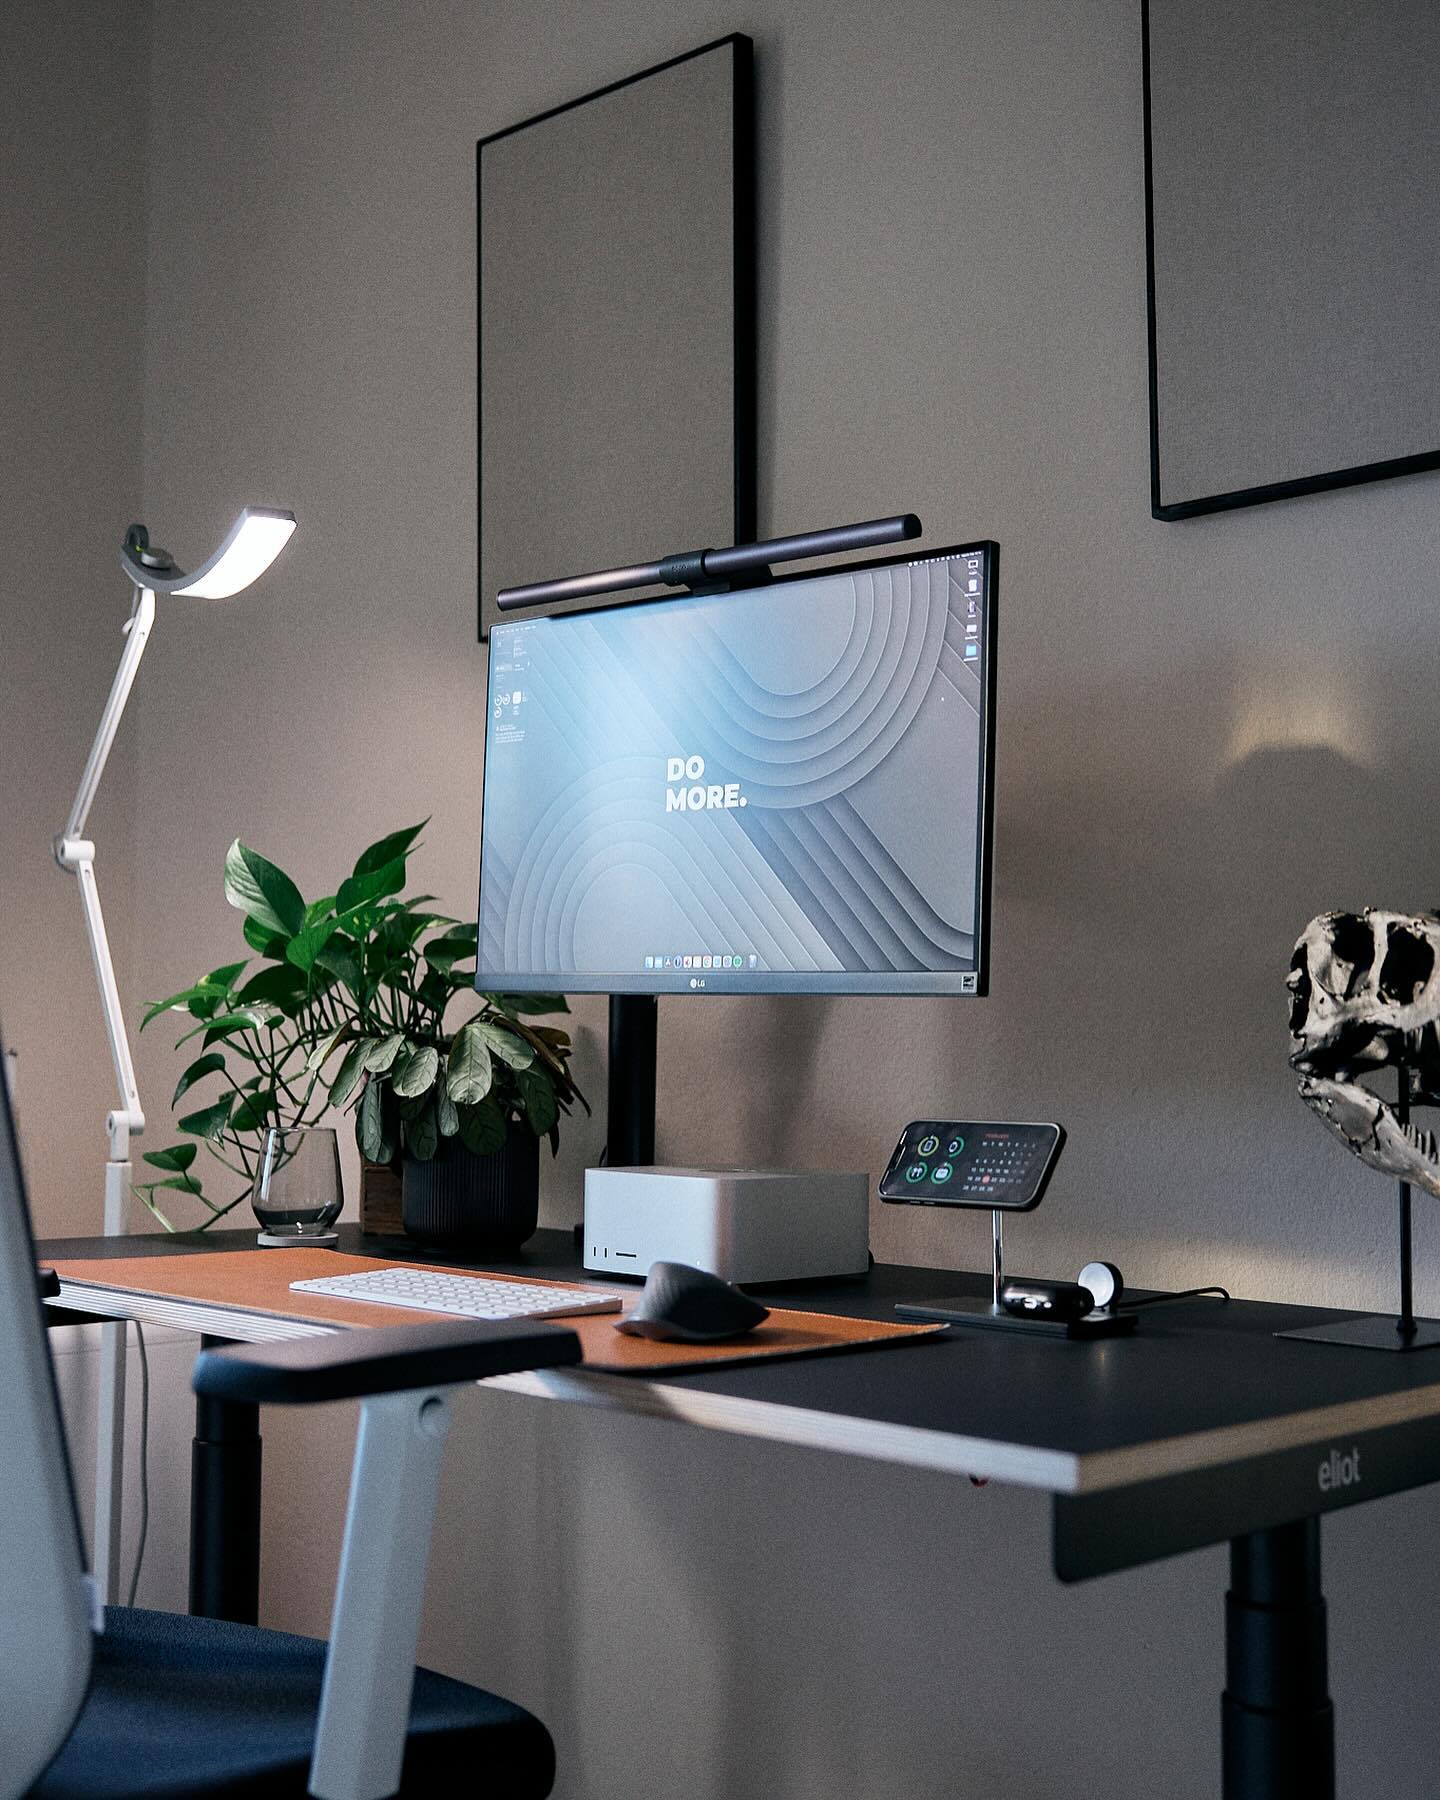 A well-organised work station with a height-adjustable desk, featuring a desktop computer with “DO MORE” on the screen, a soundbar, a phone on a stand, a Mac Studio, a decorative dinosaur skull, and green plants, all under a task lamp and against a wall with framed art